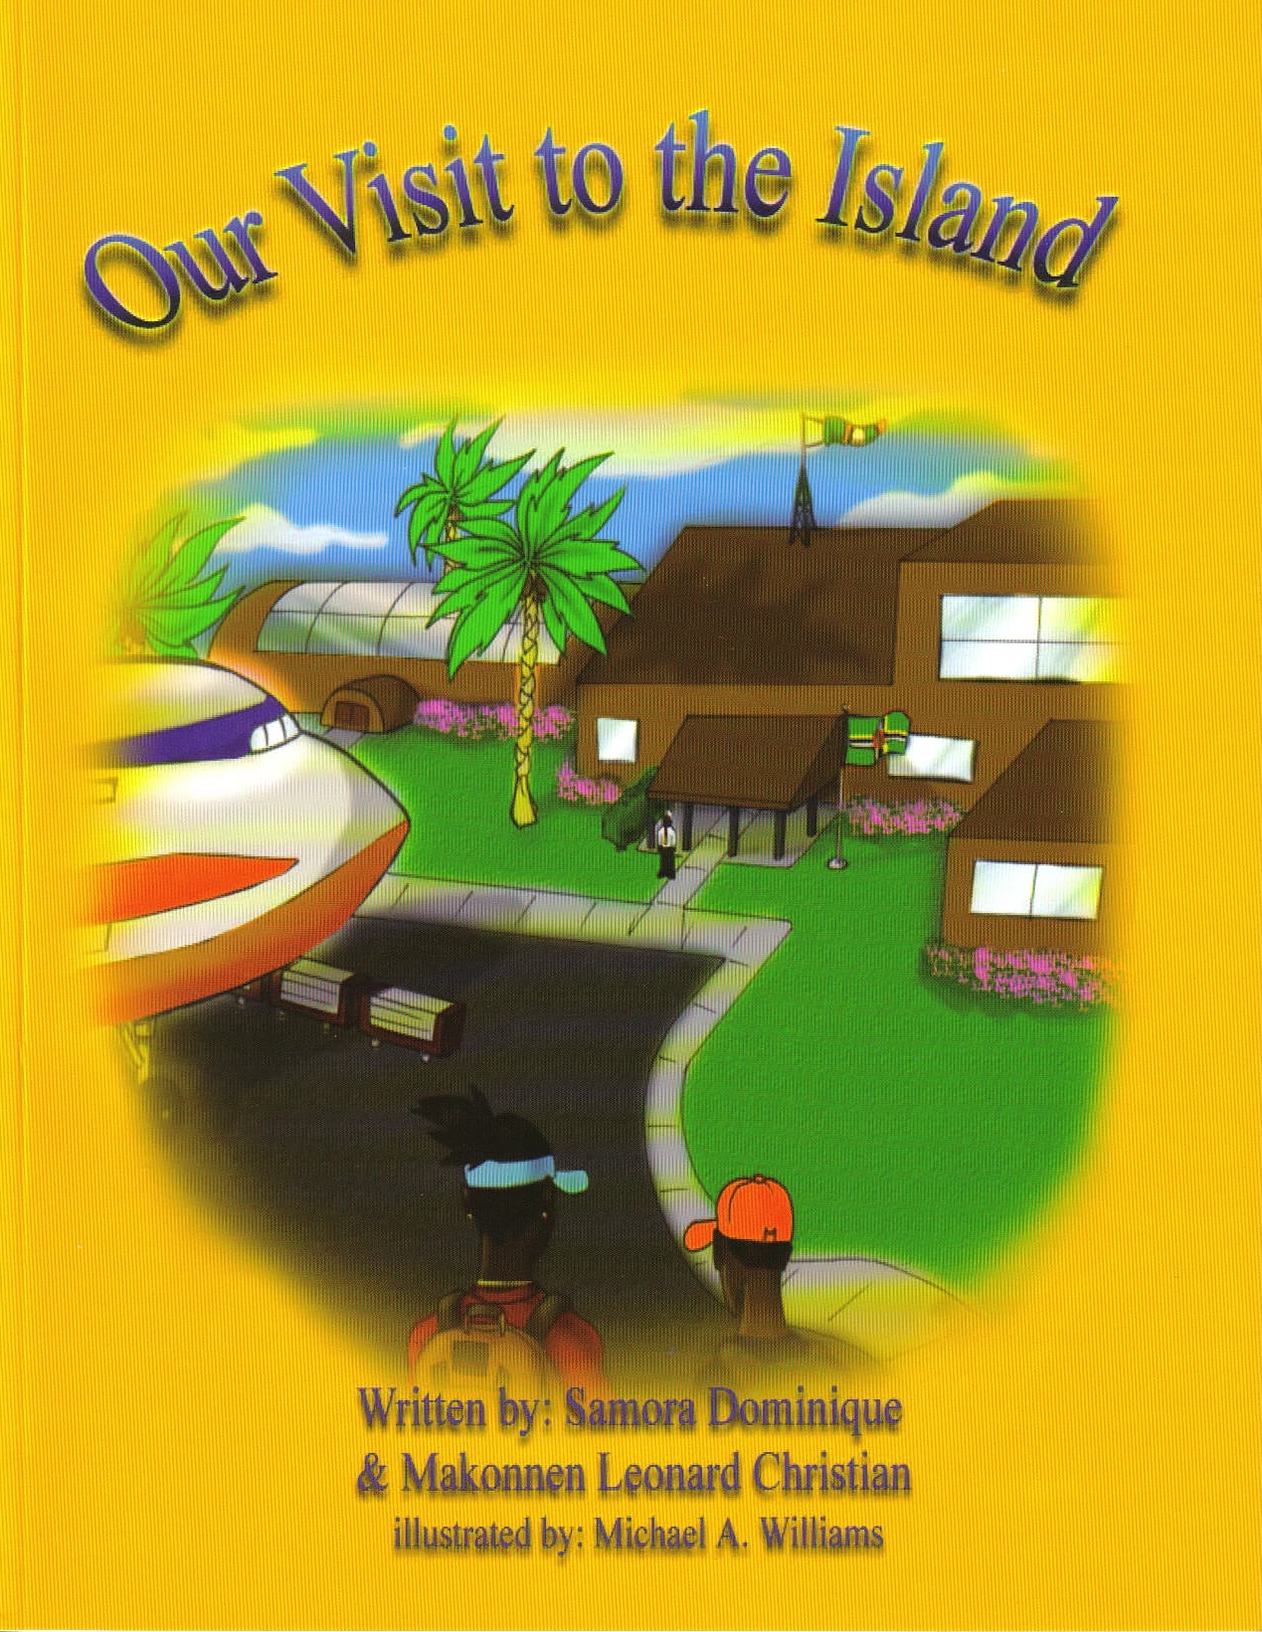 Our Visit to the Island book cover